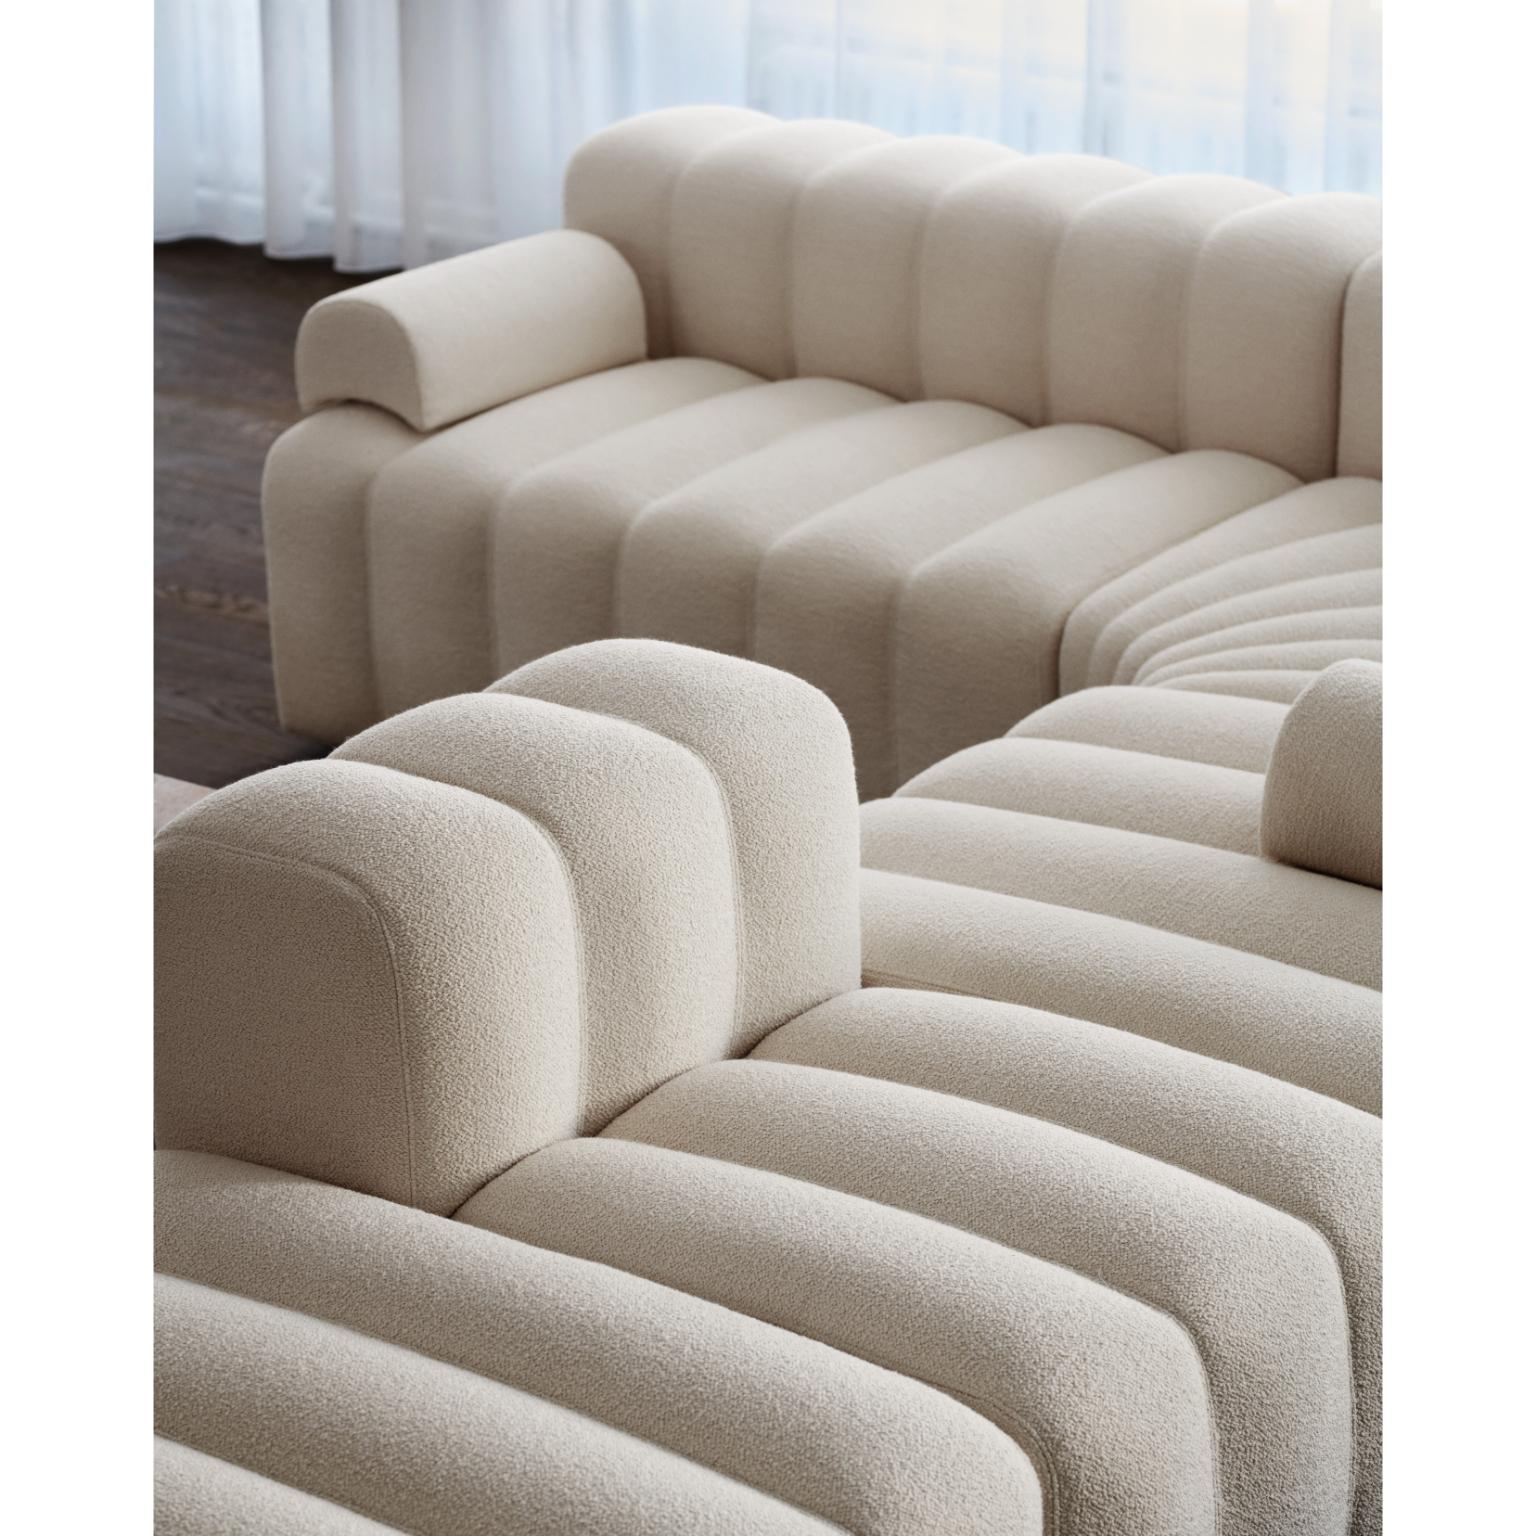 Studio Lounge Medium Right Modular Sofa With Short Armrest by NORR11
Dimensions: D 130 x W 113 x H 70 cm. SH 47 cm. 
Materials: Foam, wood and upholstery.
Upholstery: Barnum Boucle Color 3.

Available in different upholstery options. A plywood